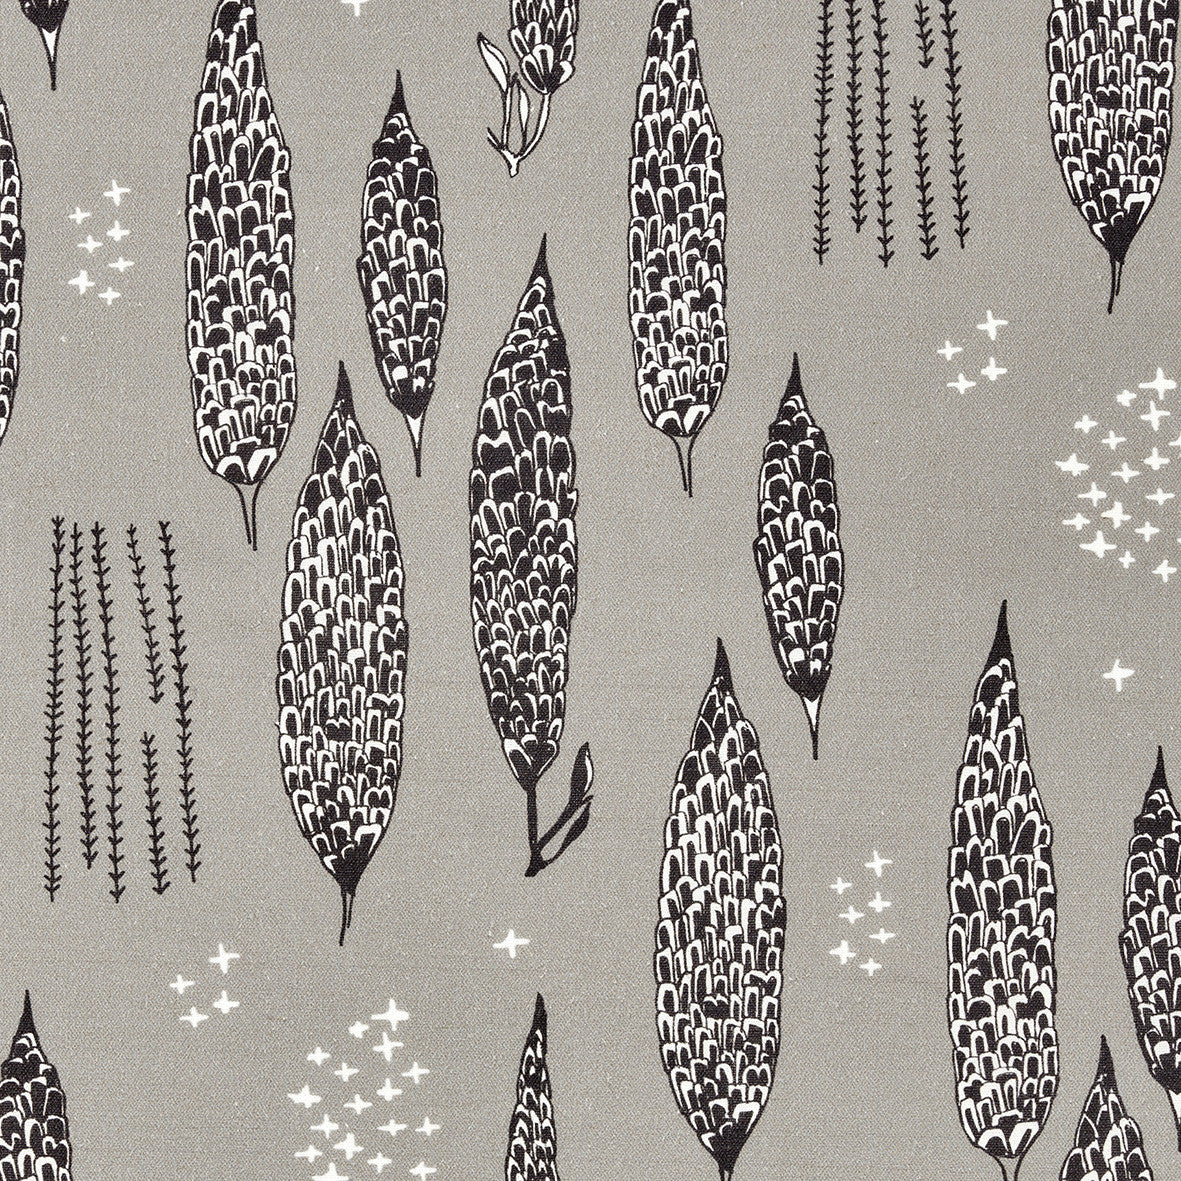 Graphic Rosemary Sprig Pattern Printed Linen Cotton Canvas Home Decor Home Decor Fabric in Light Dove Grey and Black for curtain, blinds or upholstery ships from Canada (USA)